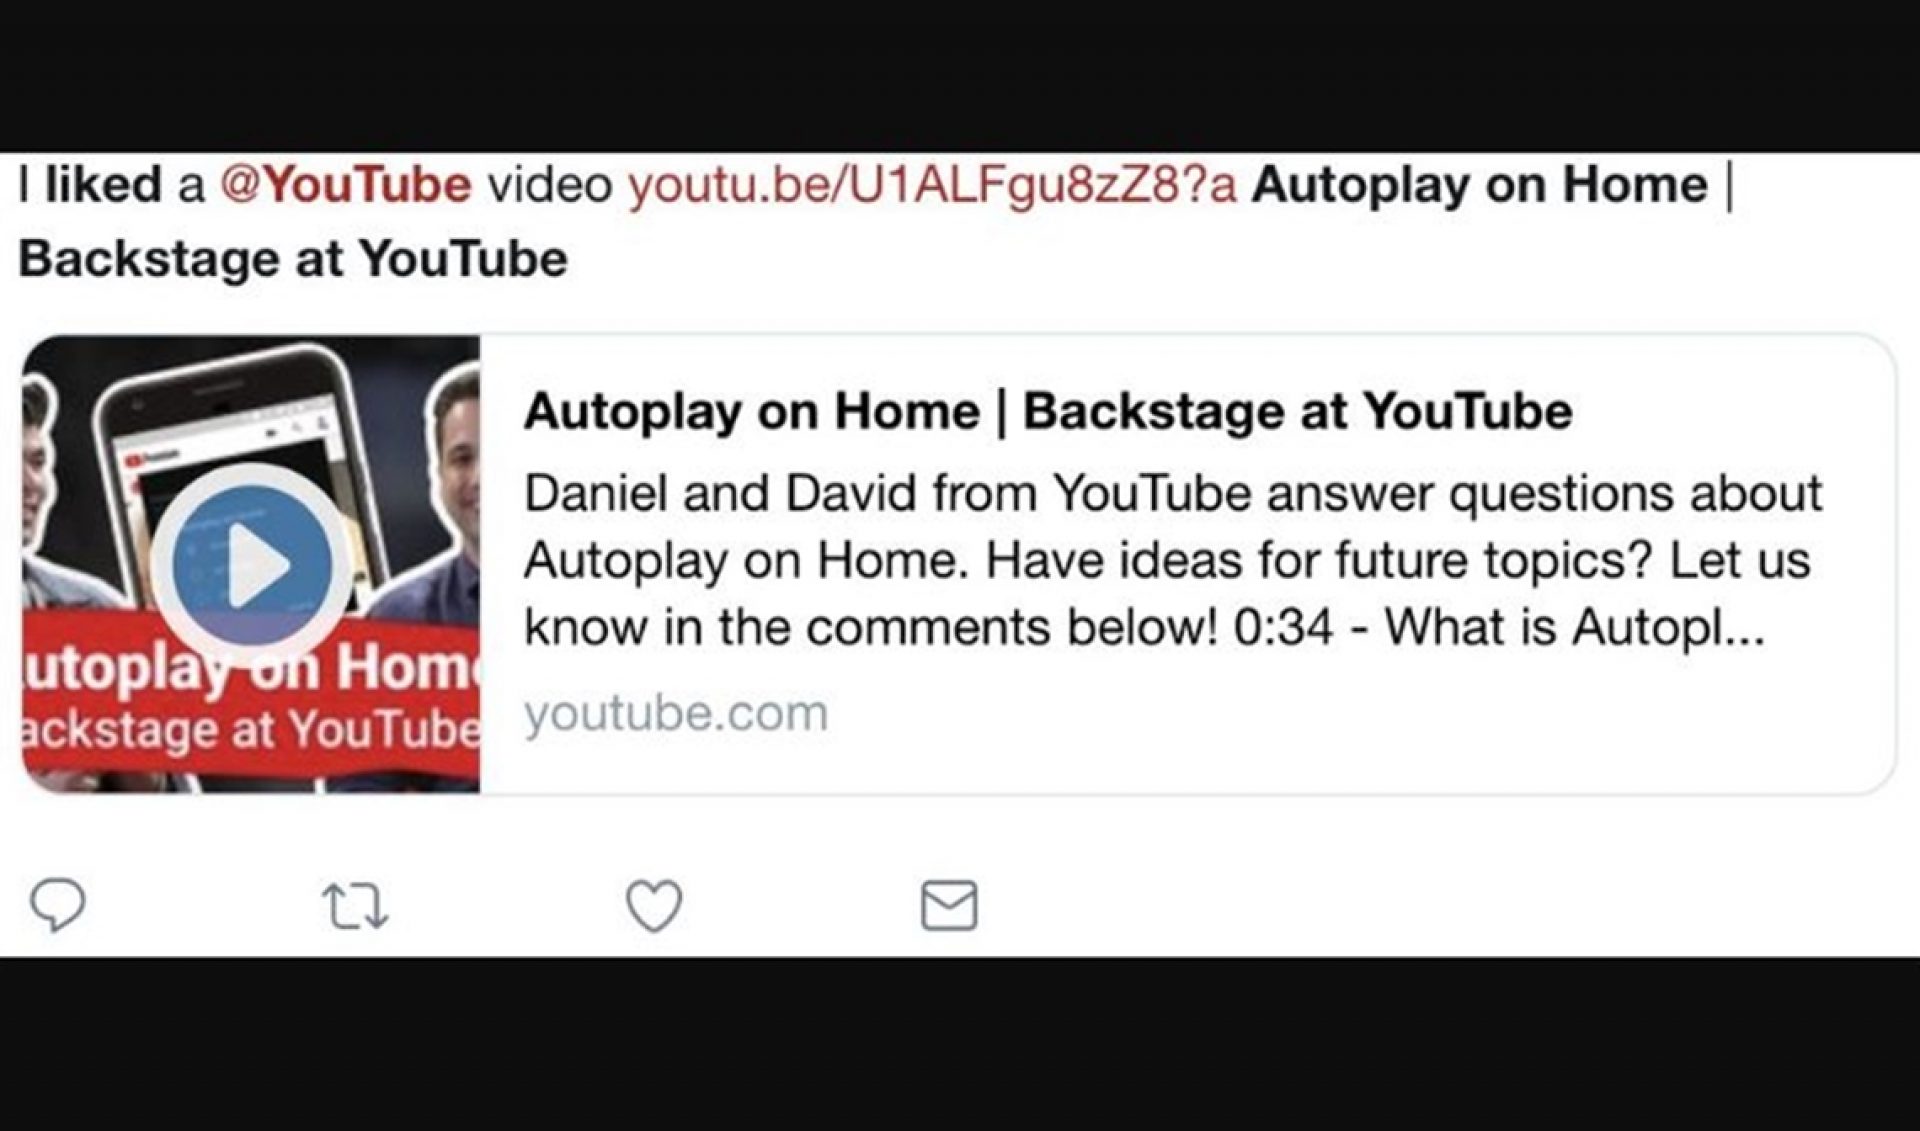 YouTube Axes Ability To Automatically Share Video Uploads, ‘Likes’ On Twitter